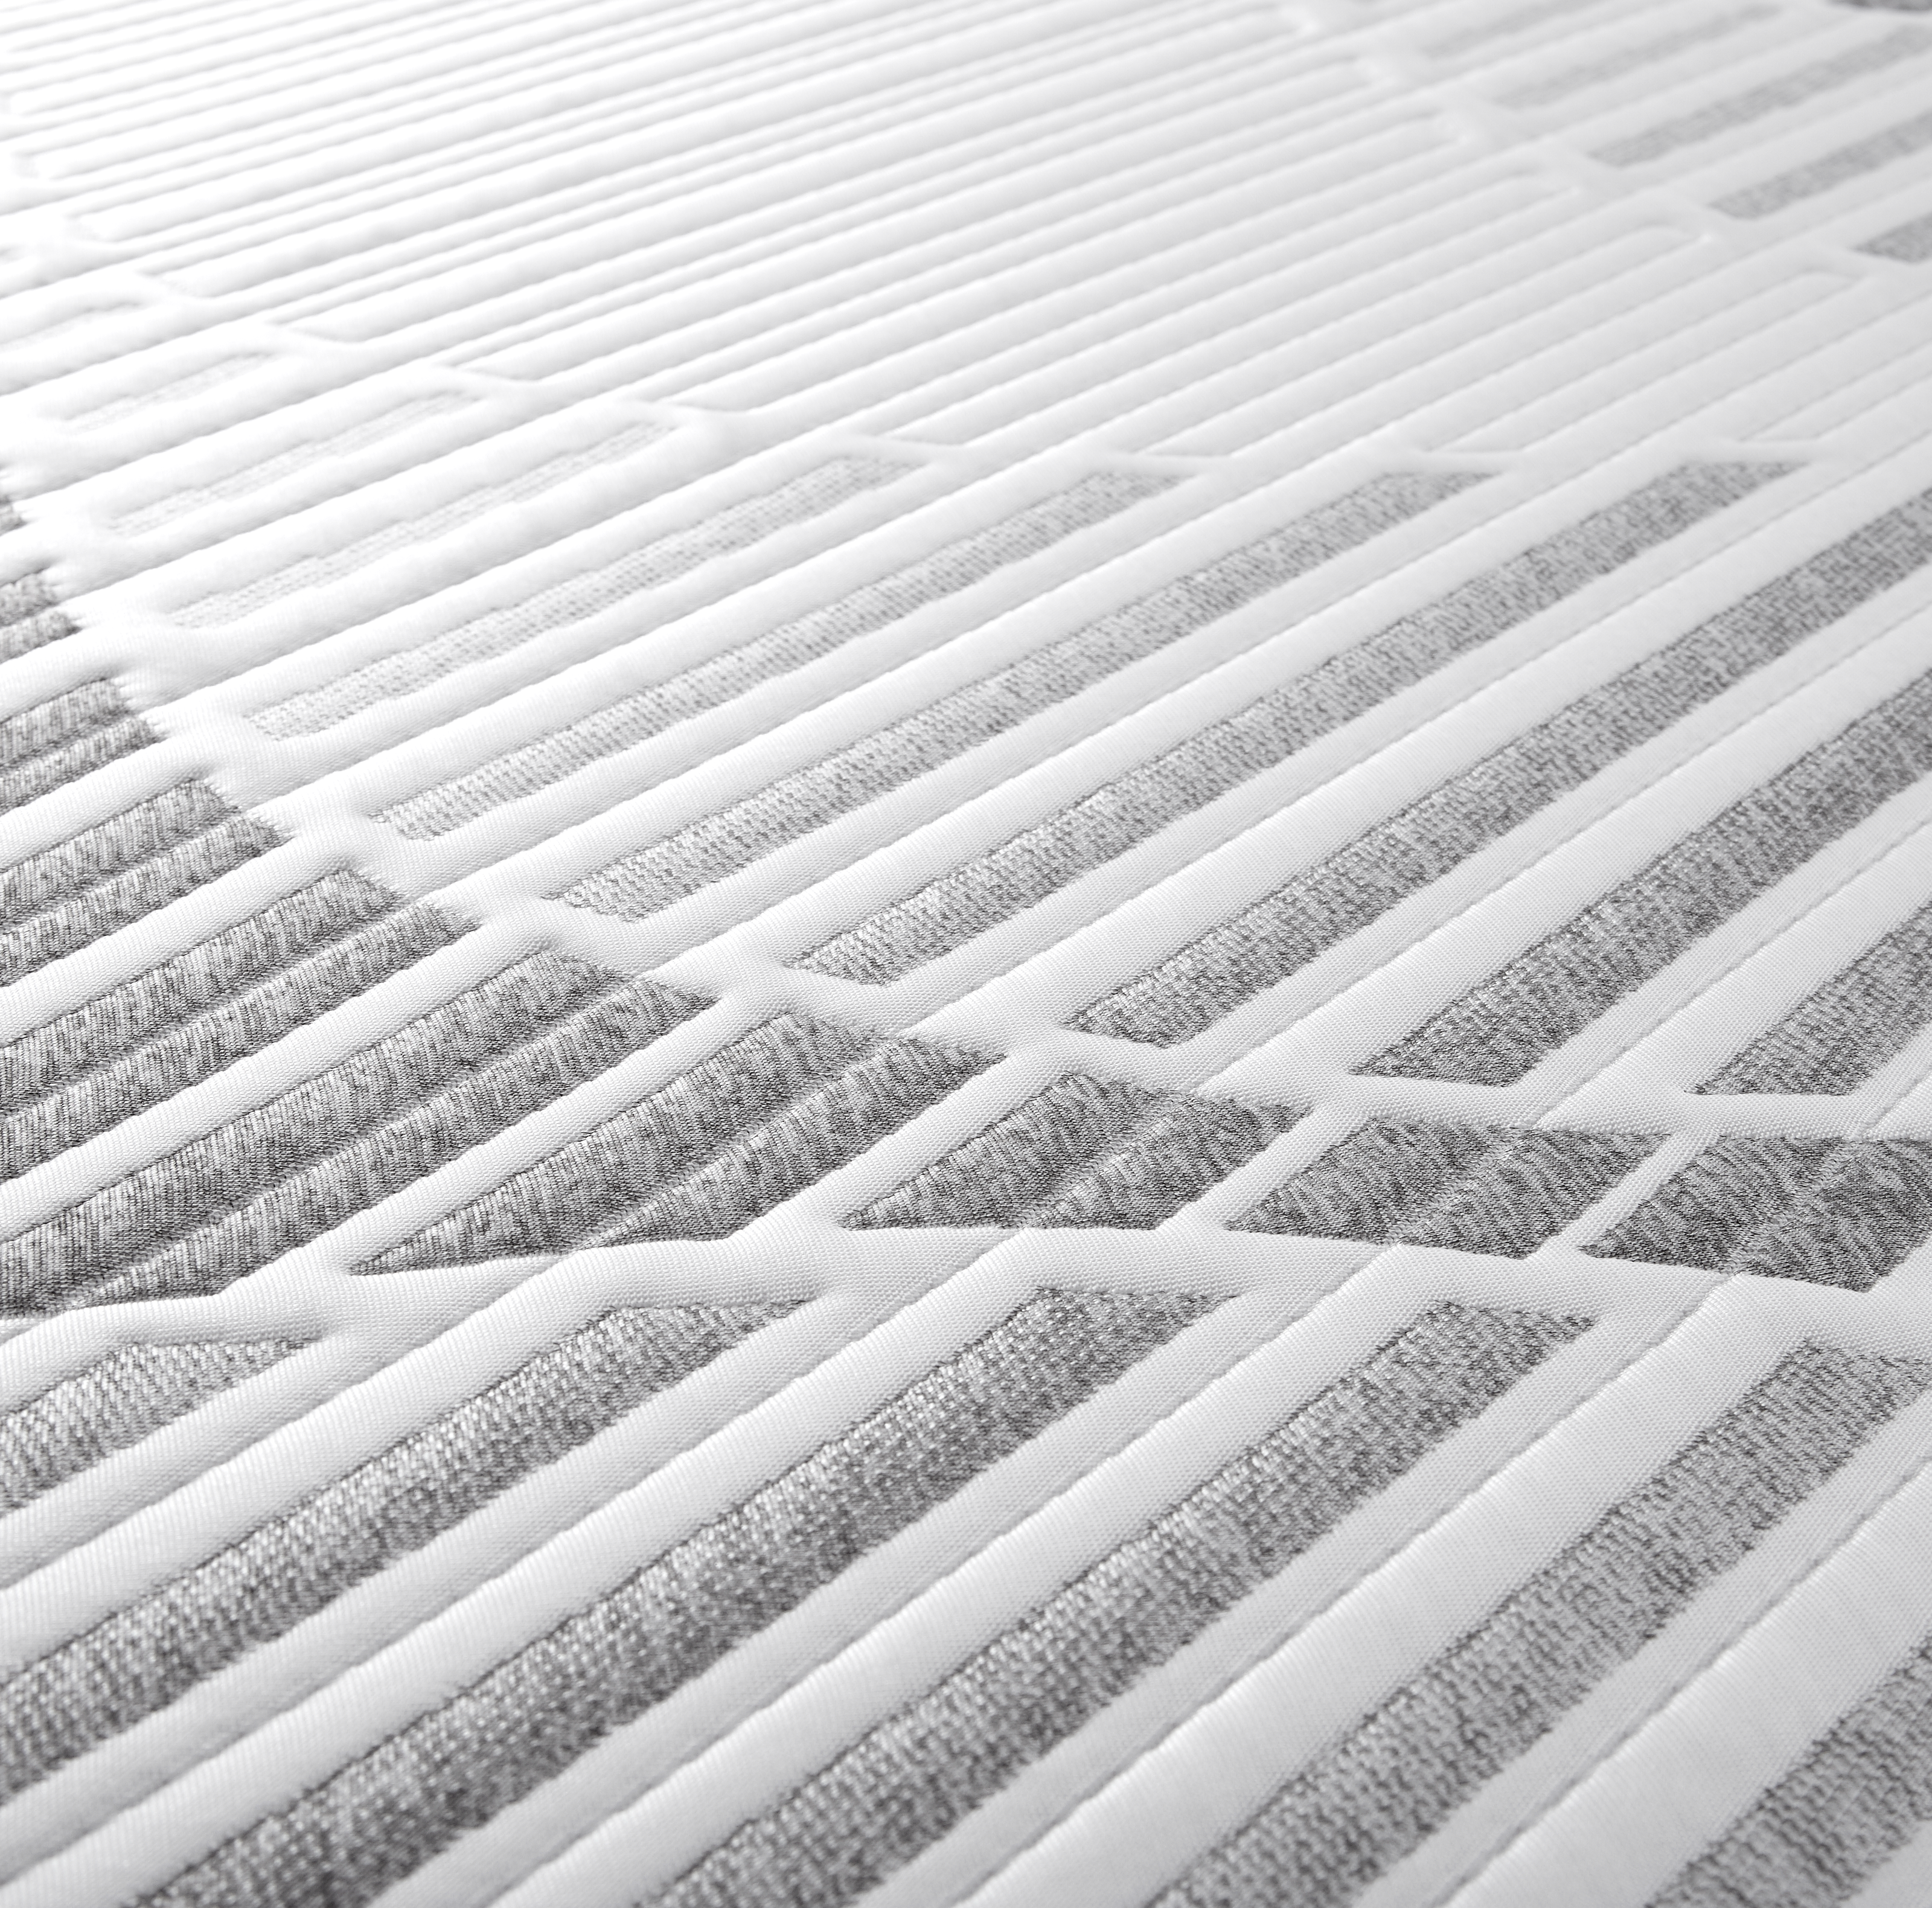 Sopor 14" Luxury Hybrid Mattress close up angle of top fabric showing off the white and grey pattern. Modern style in tight alternating pattern. 